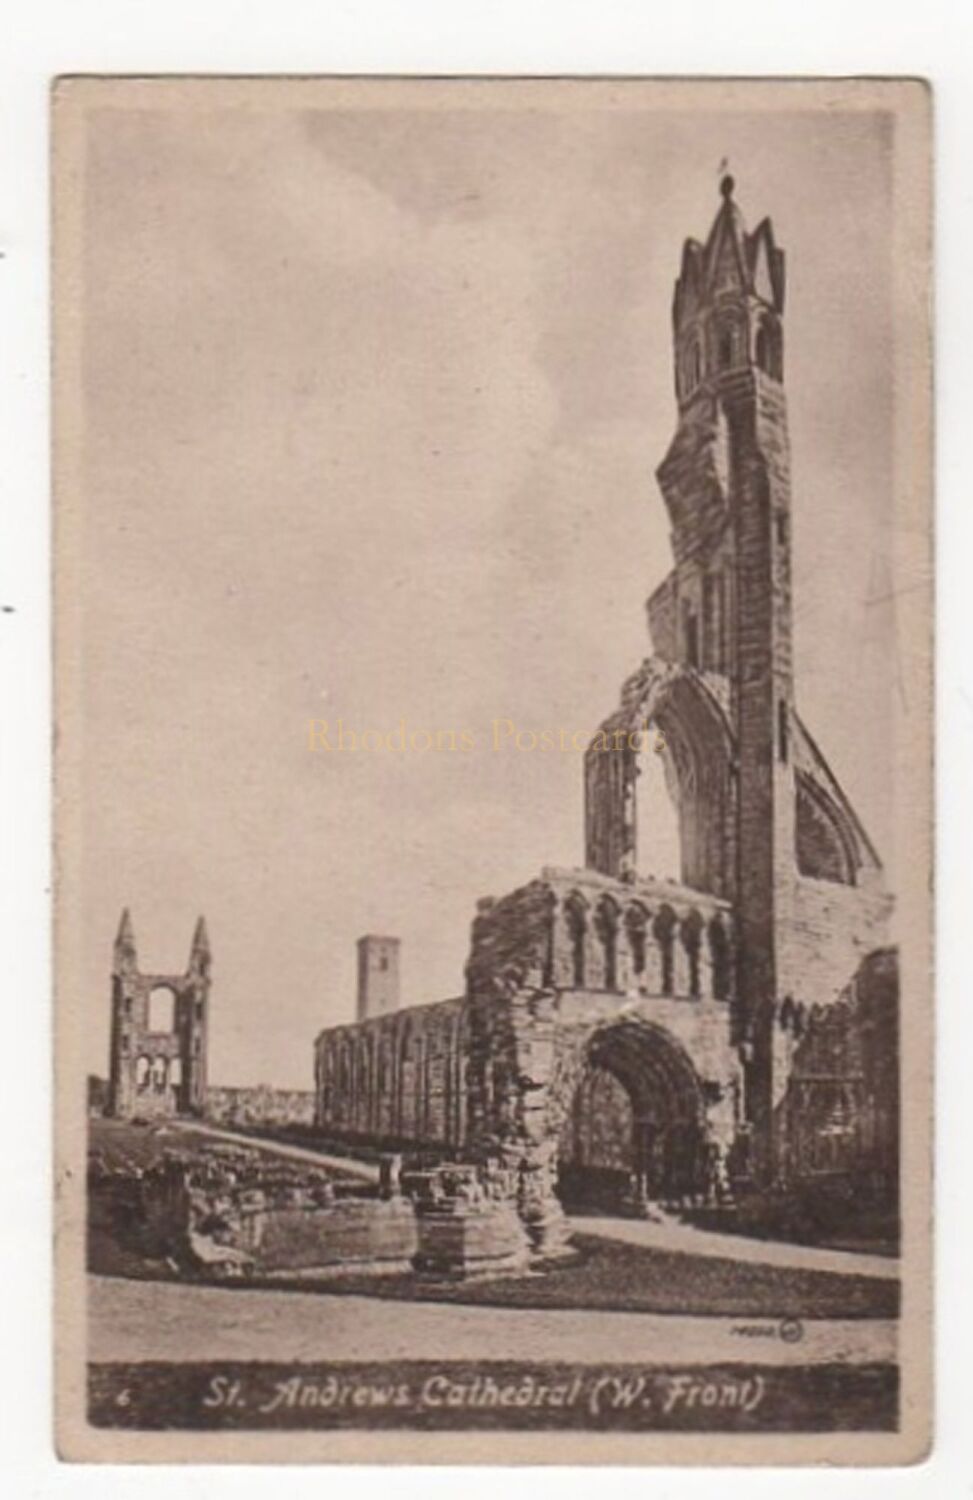 St Andrews Cathedral West Front-Early 1900s-Local Postcard Publisher Fletch